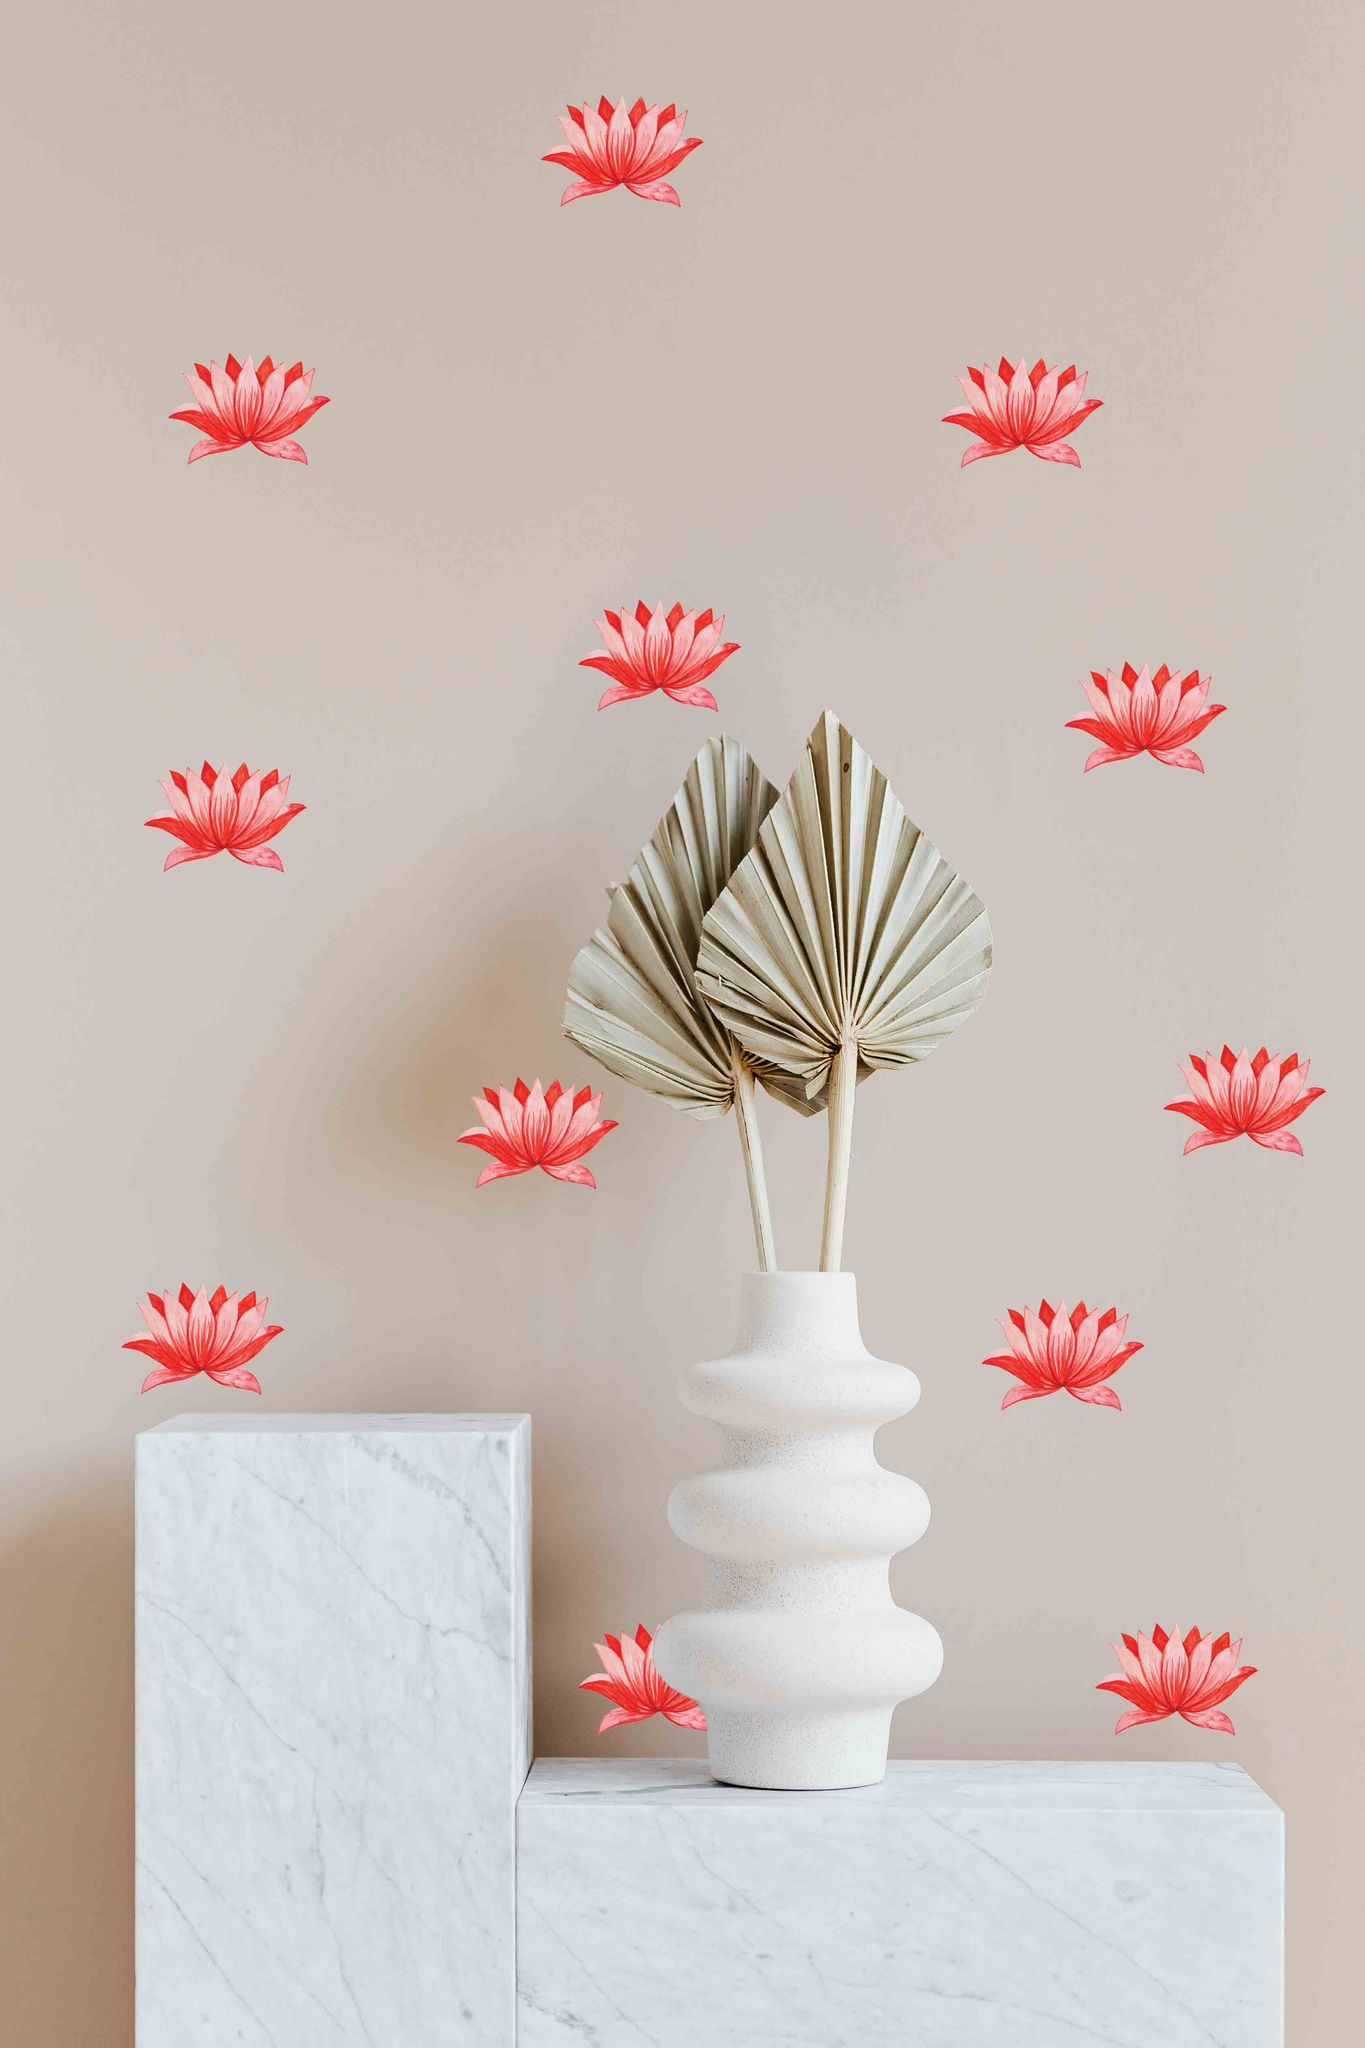 Tropical Lotus Wall Decal Sticker - Pack of 12